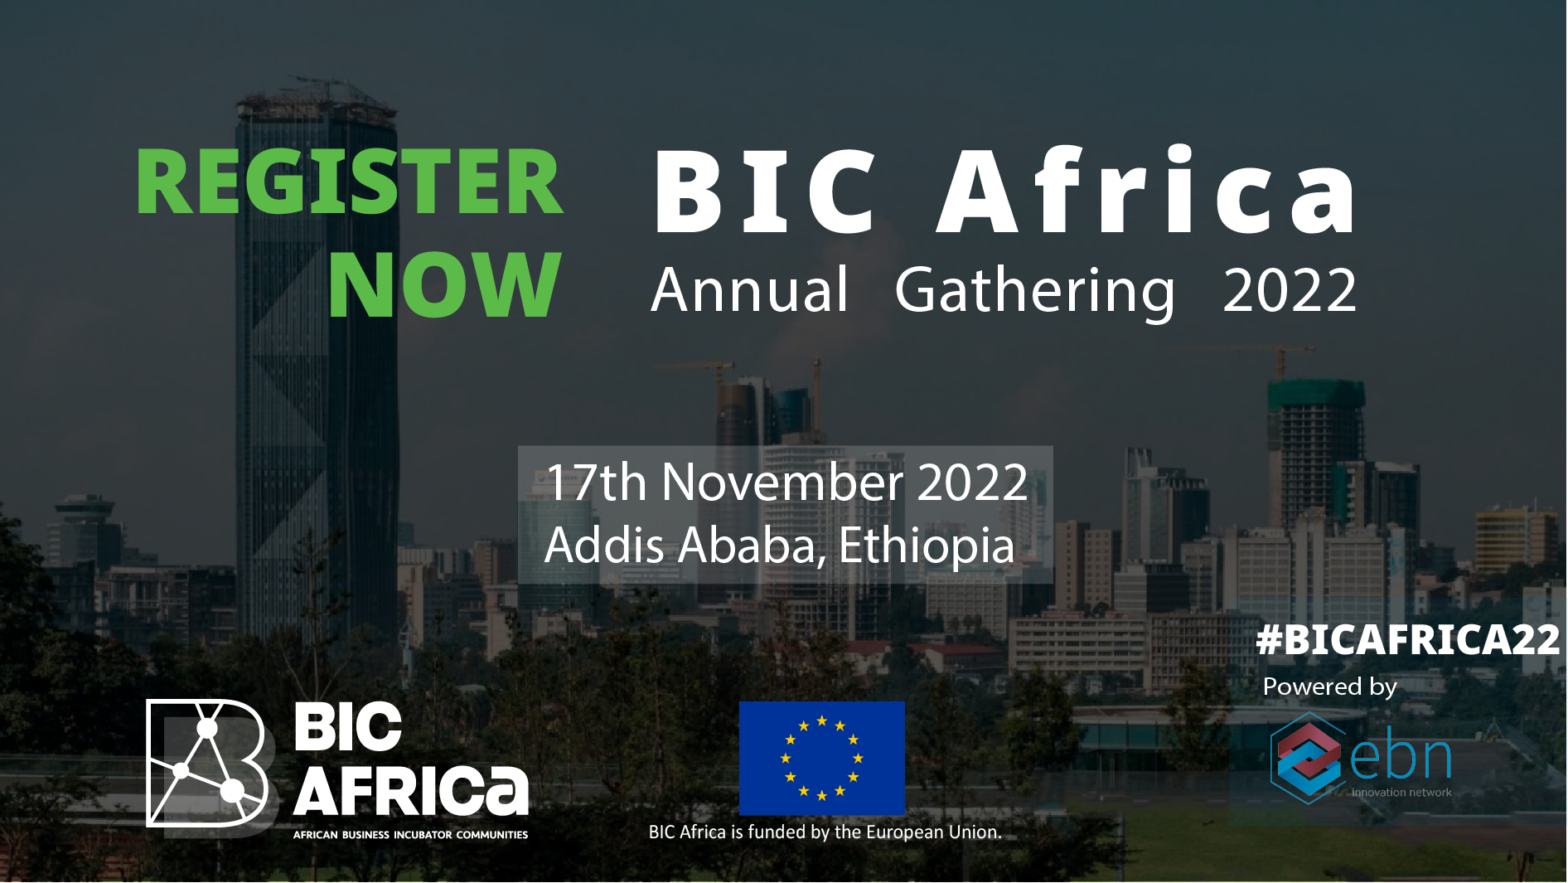 BIC Africa Annual Gathering 2022